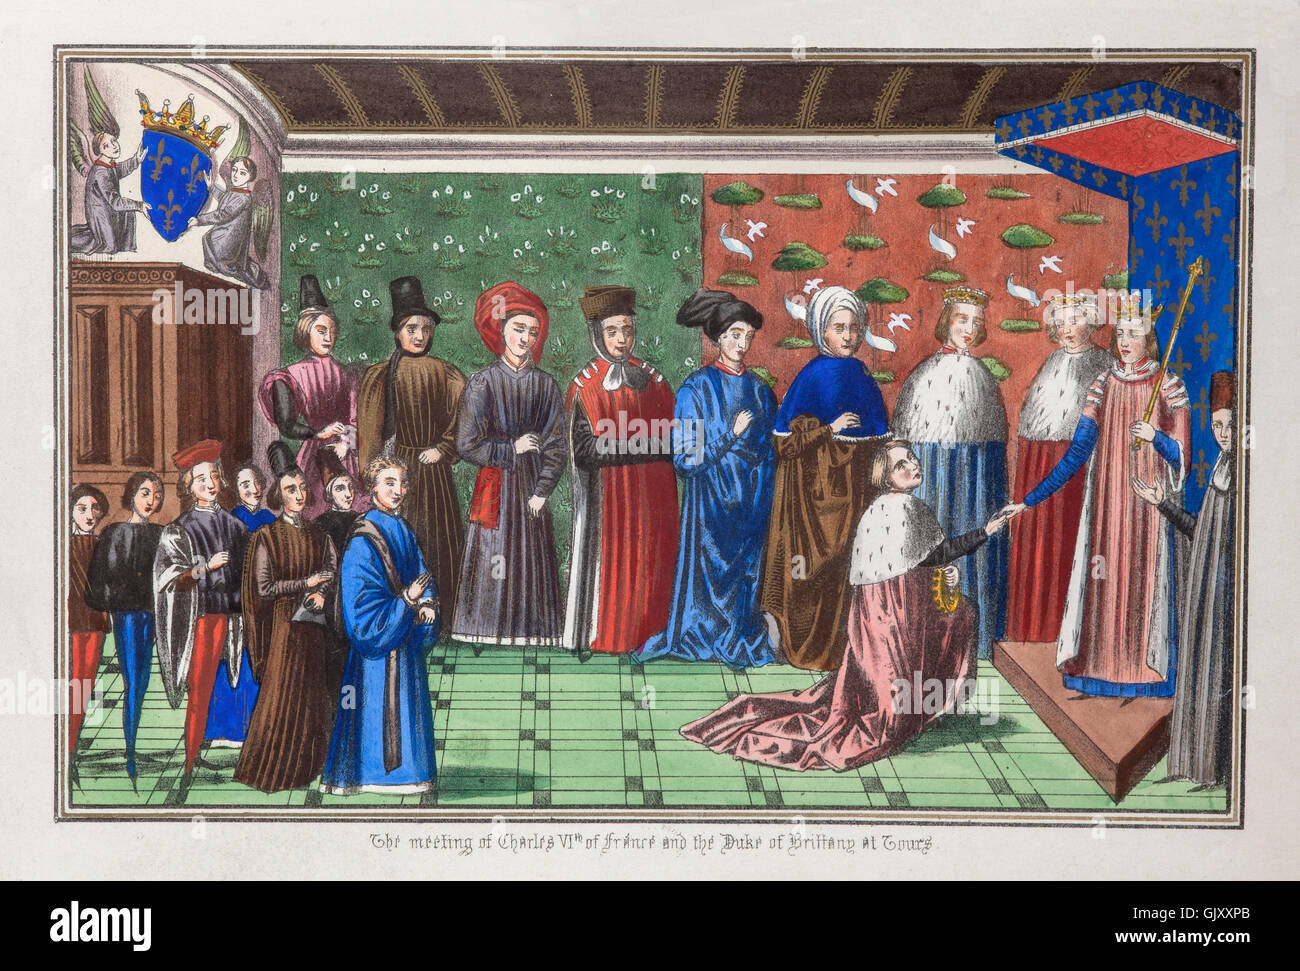 The meeting  at Tours, of Charles IV of France and the Duke of Brittany who gave protection to Sir Peter de Craon raising fears that the supremacy of the crown was under threat. Stock Photo